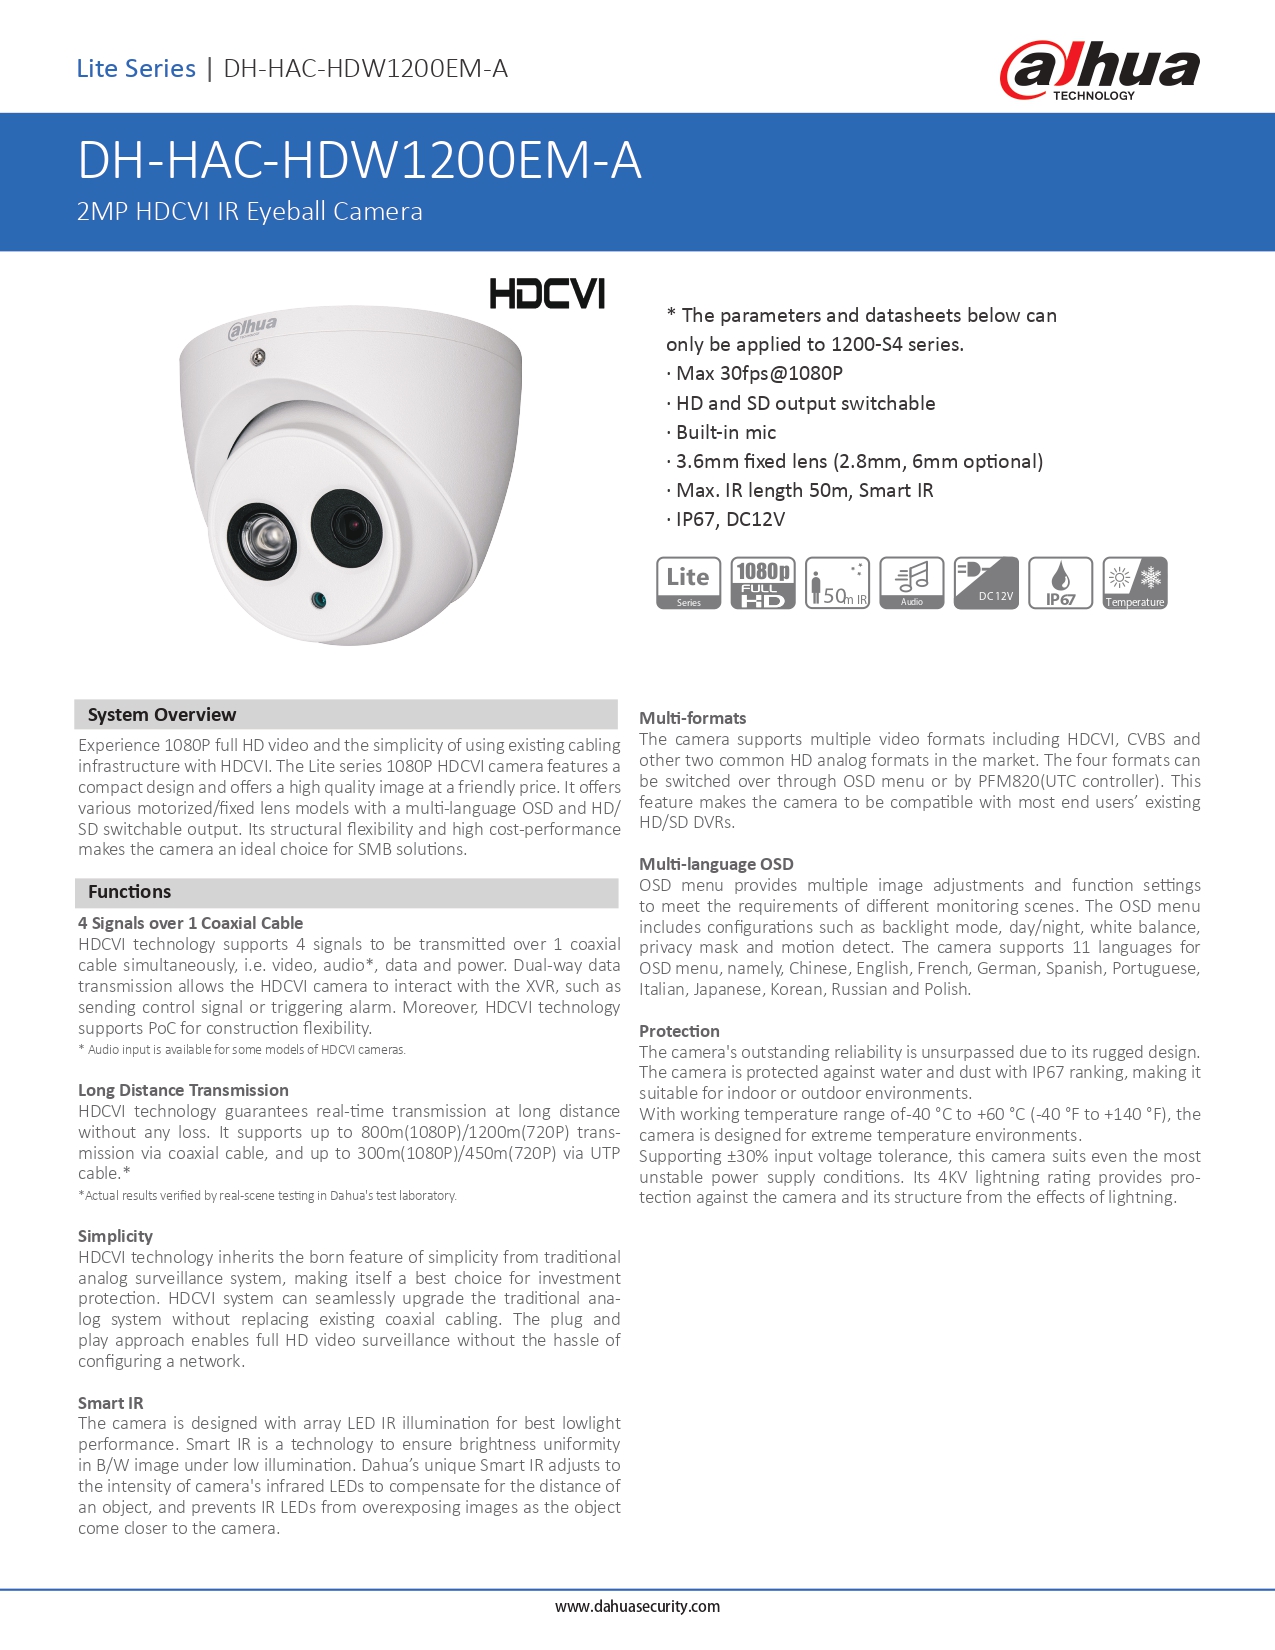 Dahua DH-HAC-HDW1200EM-A HD CCTV Camera Solution – 3 CAM Package | IR Night Vision | with Installation | Full HD 1080 | 24Hrs Recording | Life Time After Sales Support